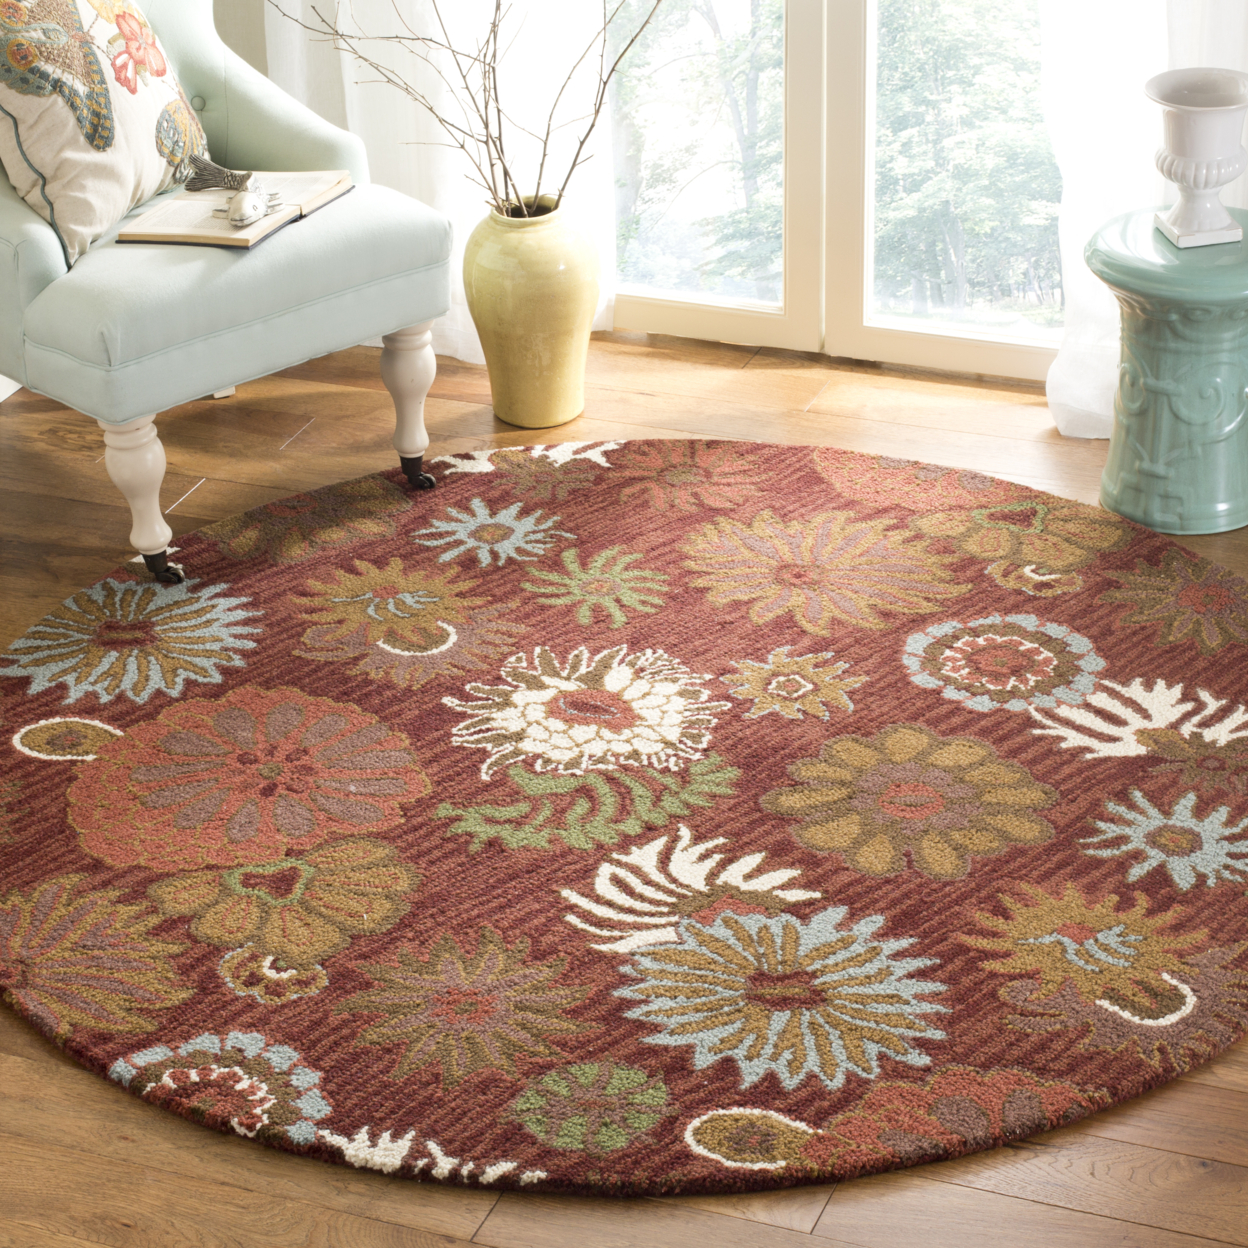 SAFAVIEH Blossom BLM731B Hand-hooked Red / Multi Rug - 6' Square